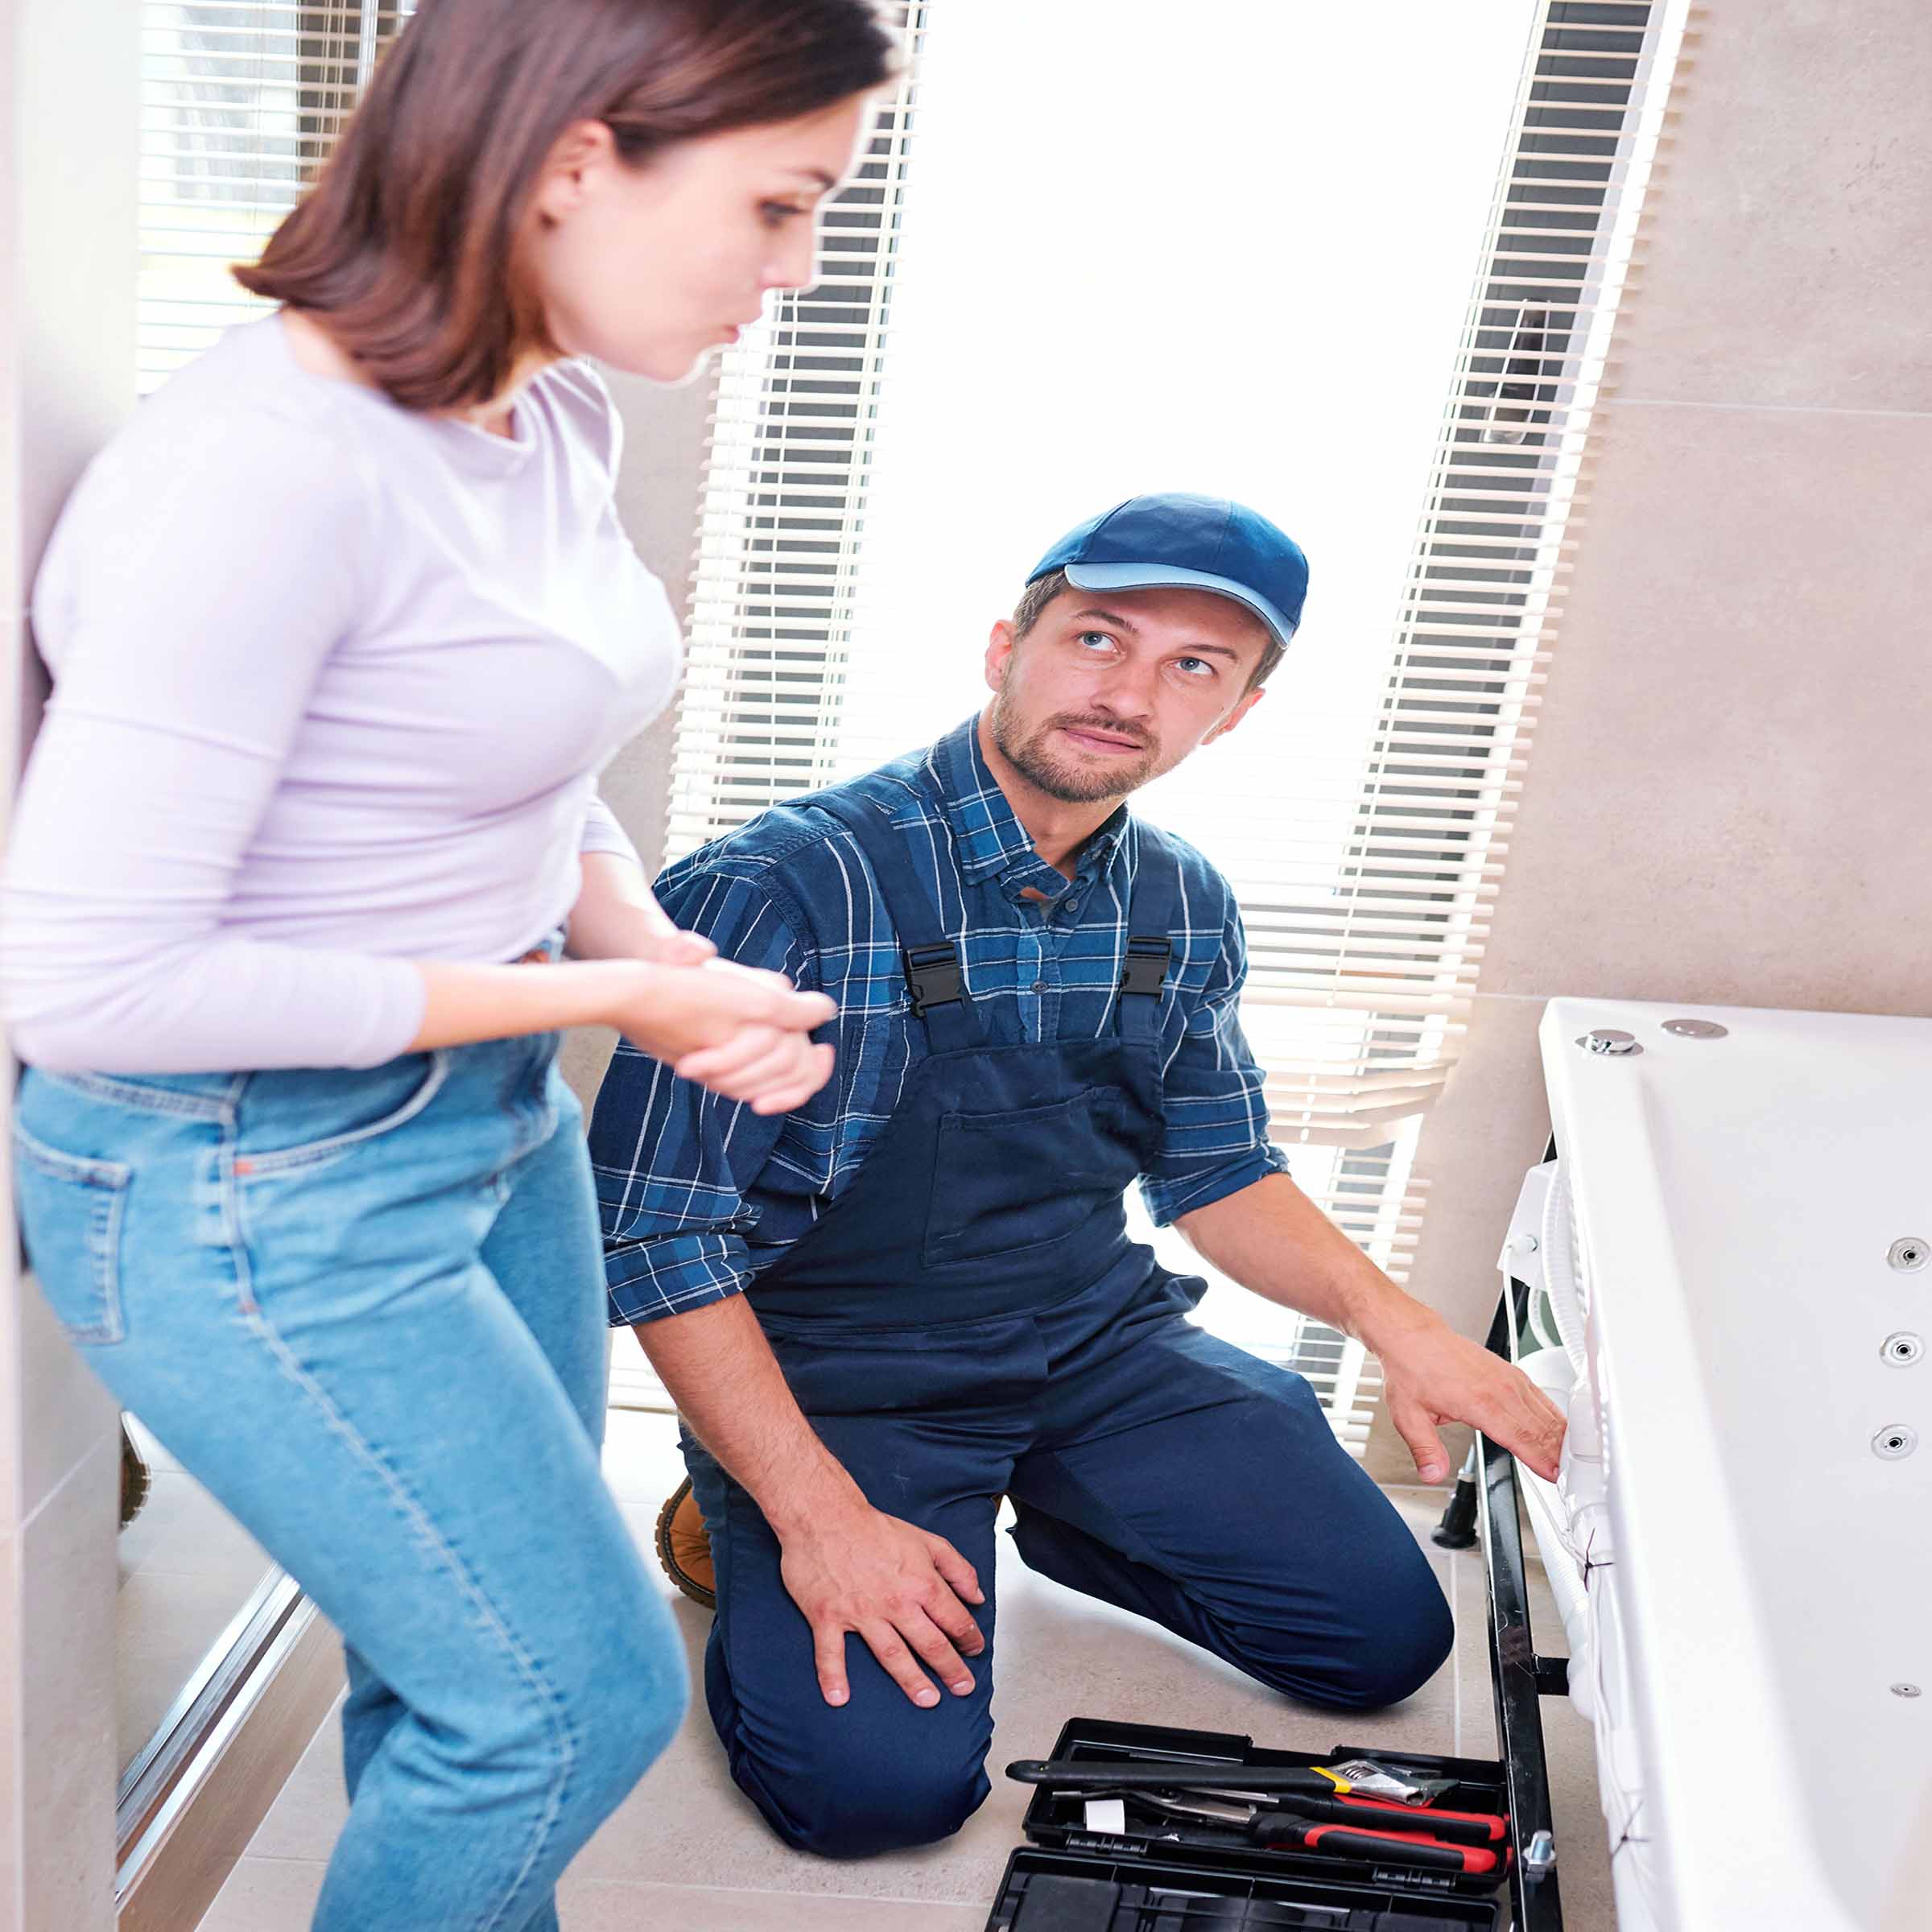 How Much Does An Apprentice Plumber Earn